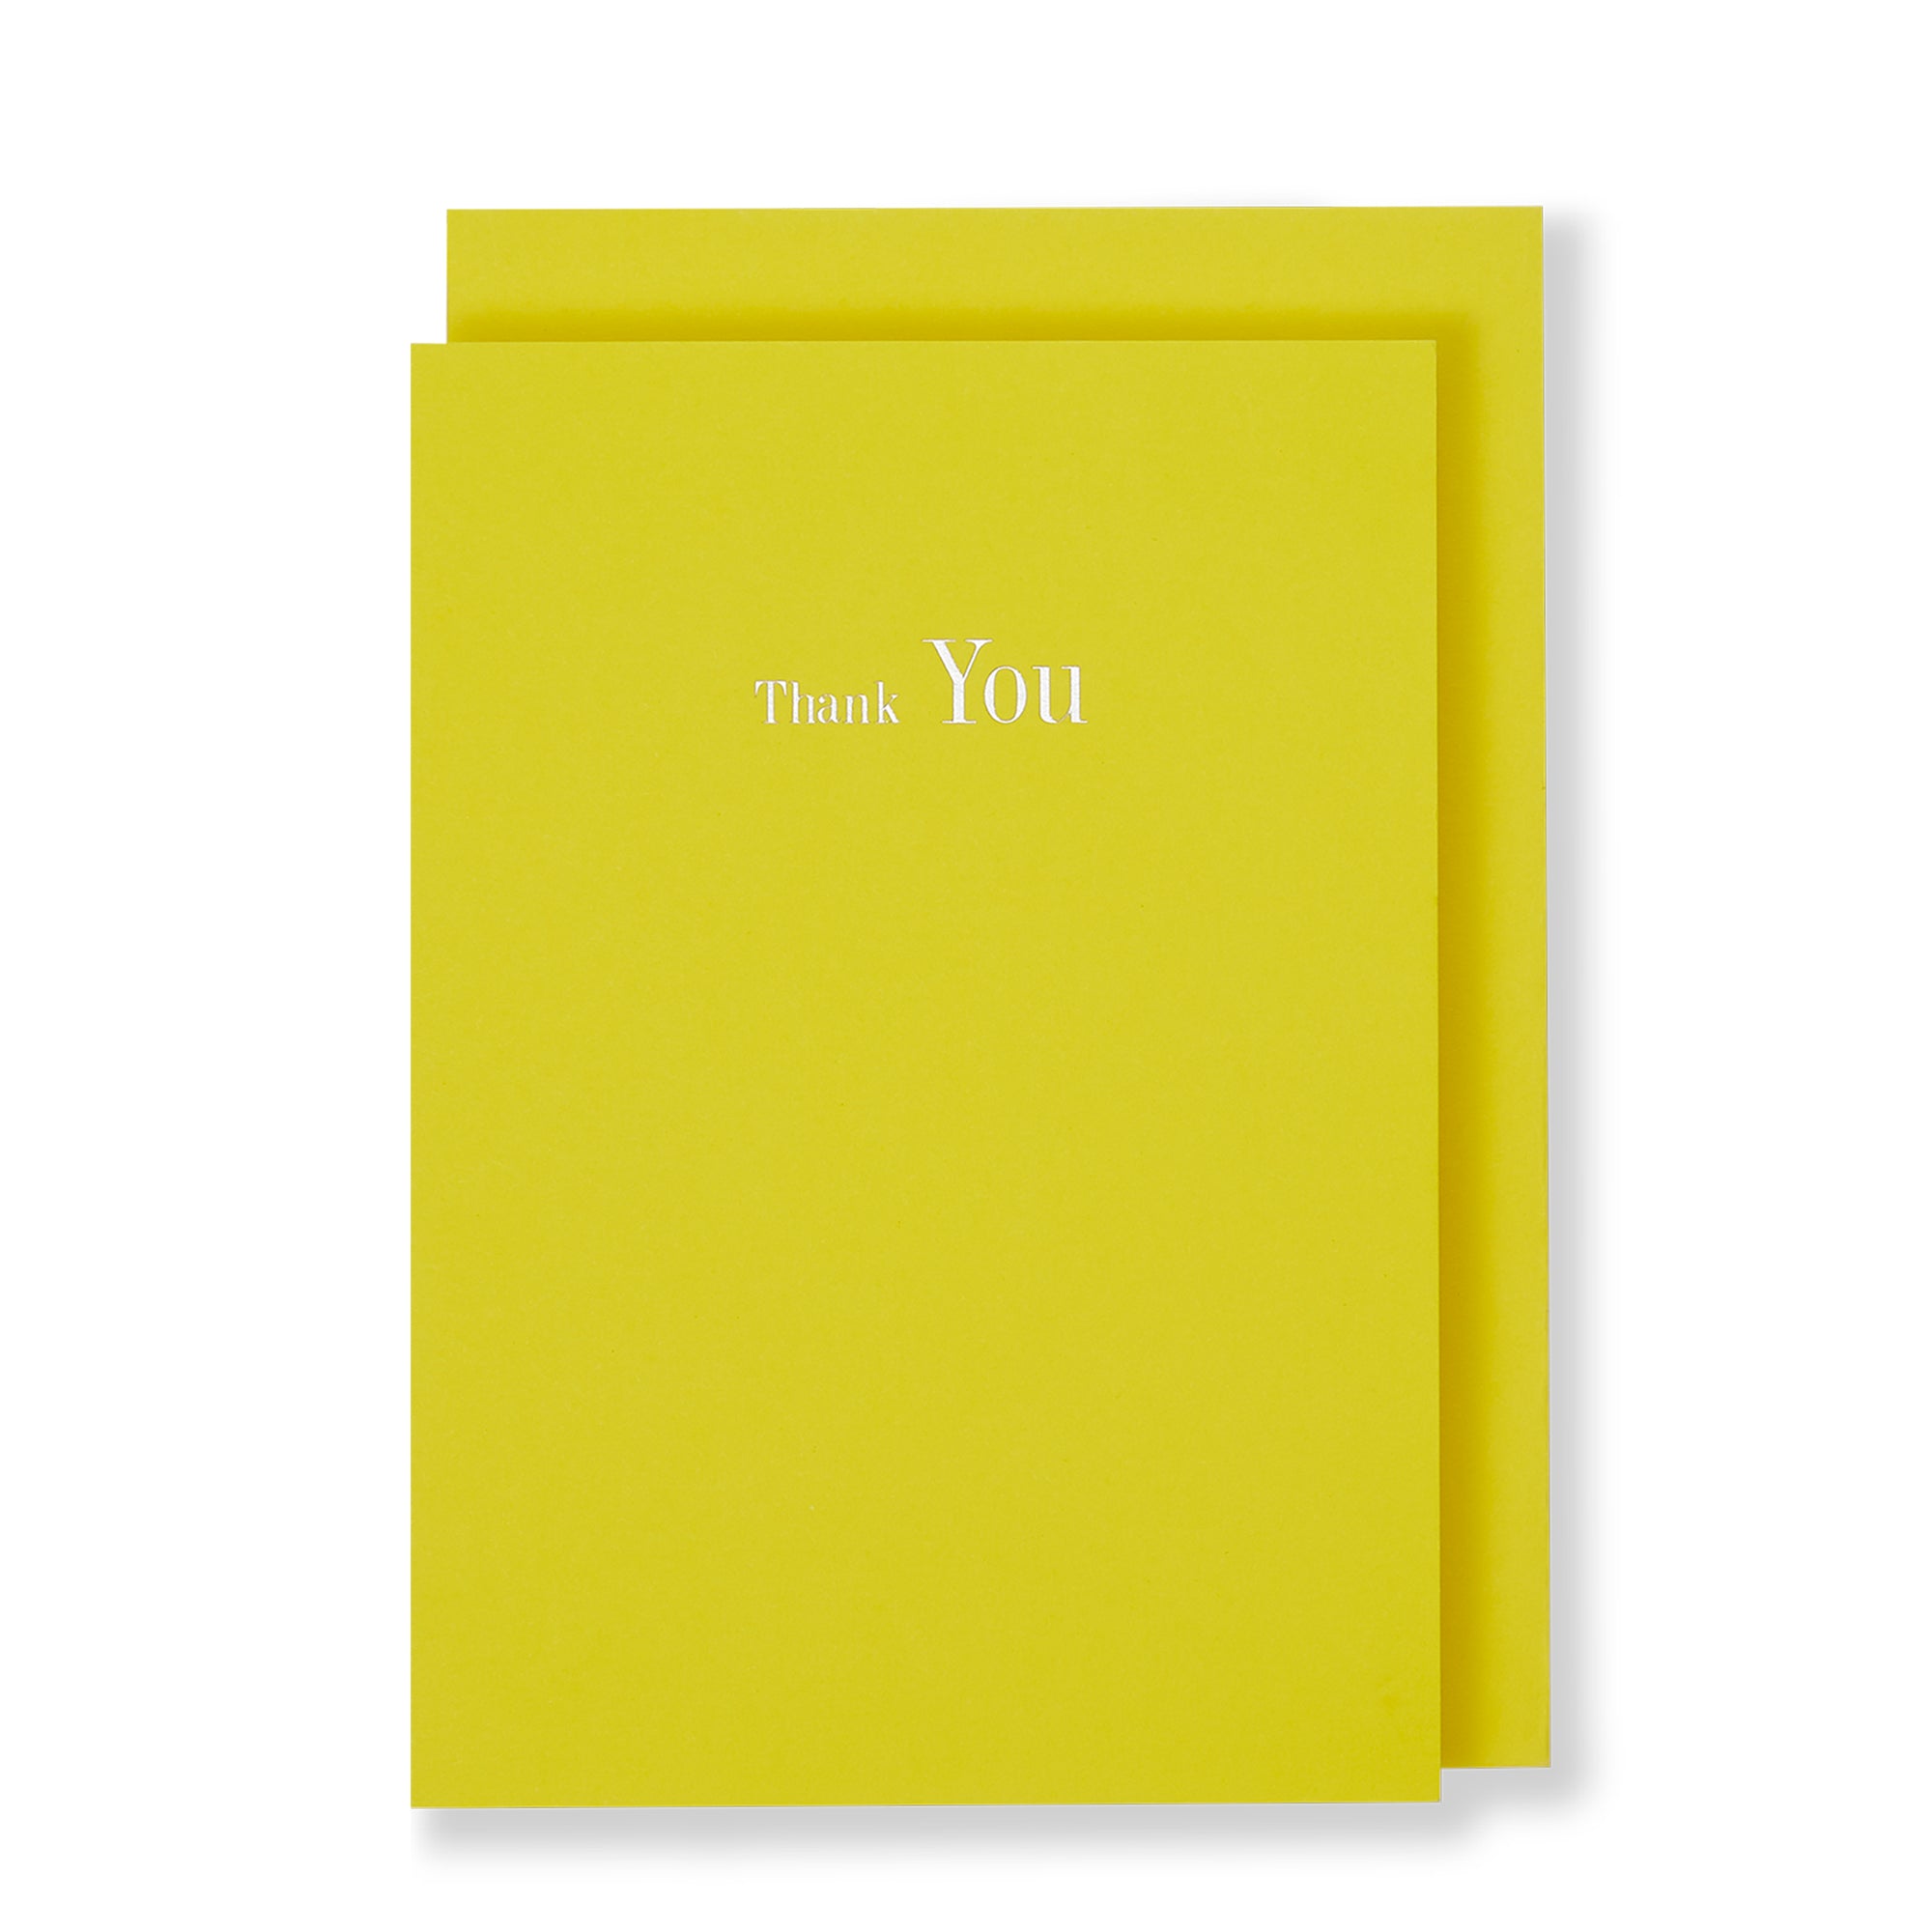 Thank You Greeting Card in Yellow, Front